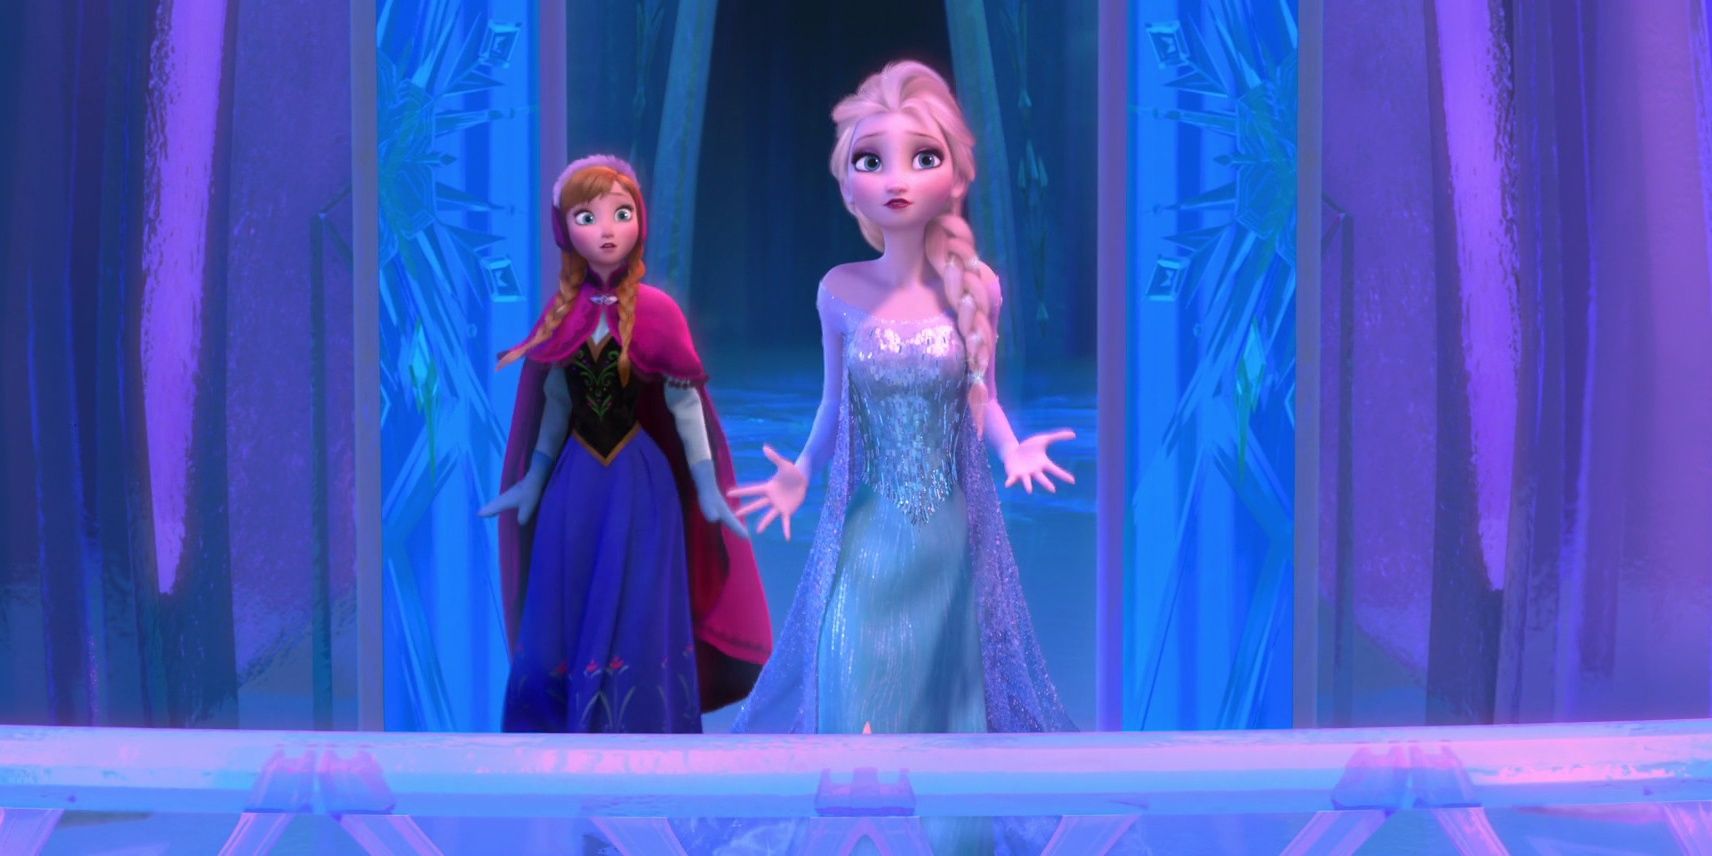 Elsa and Anna in the ice palace in Frozen.